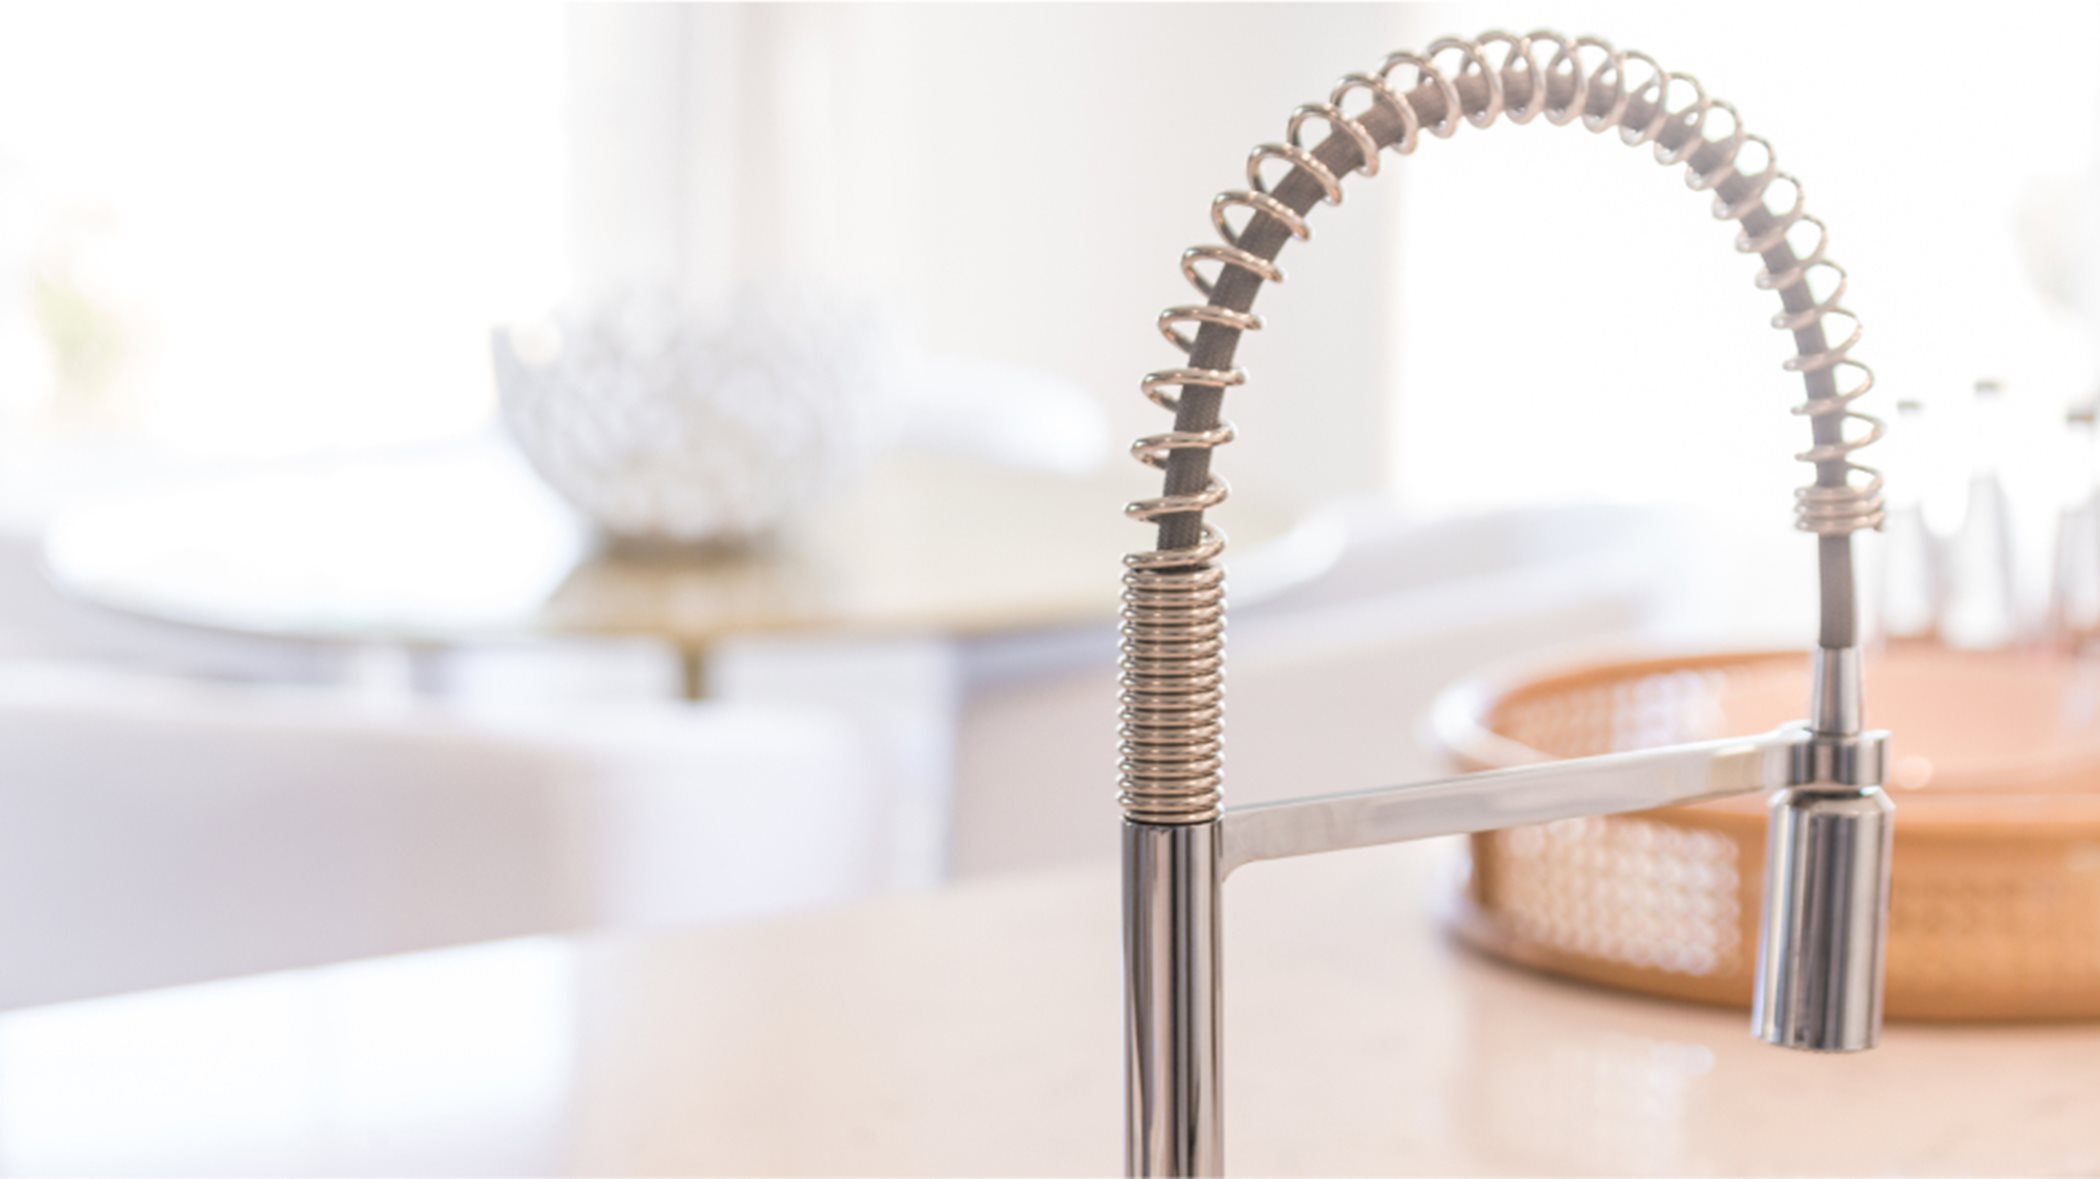 Chrome faucet with pull-out spray